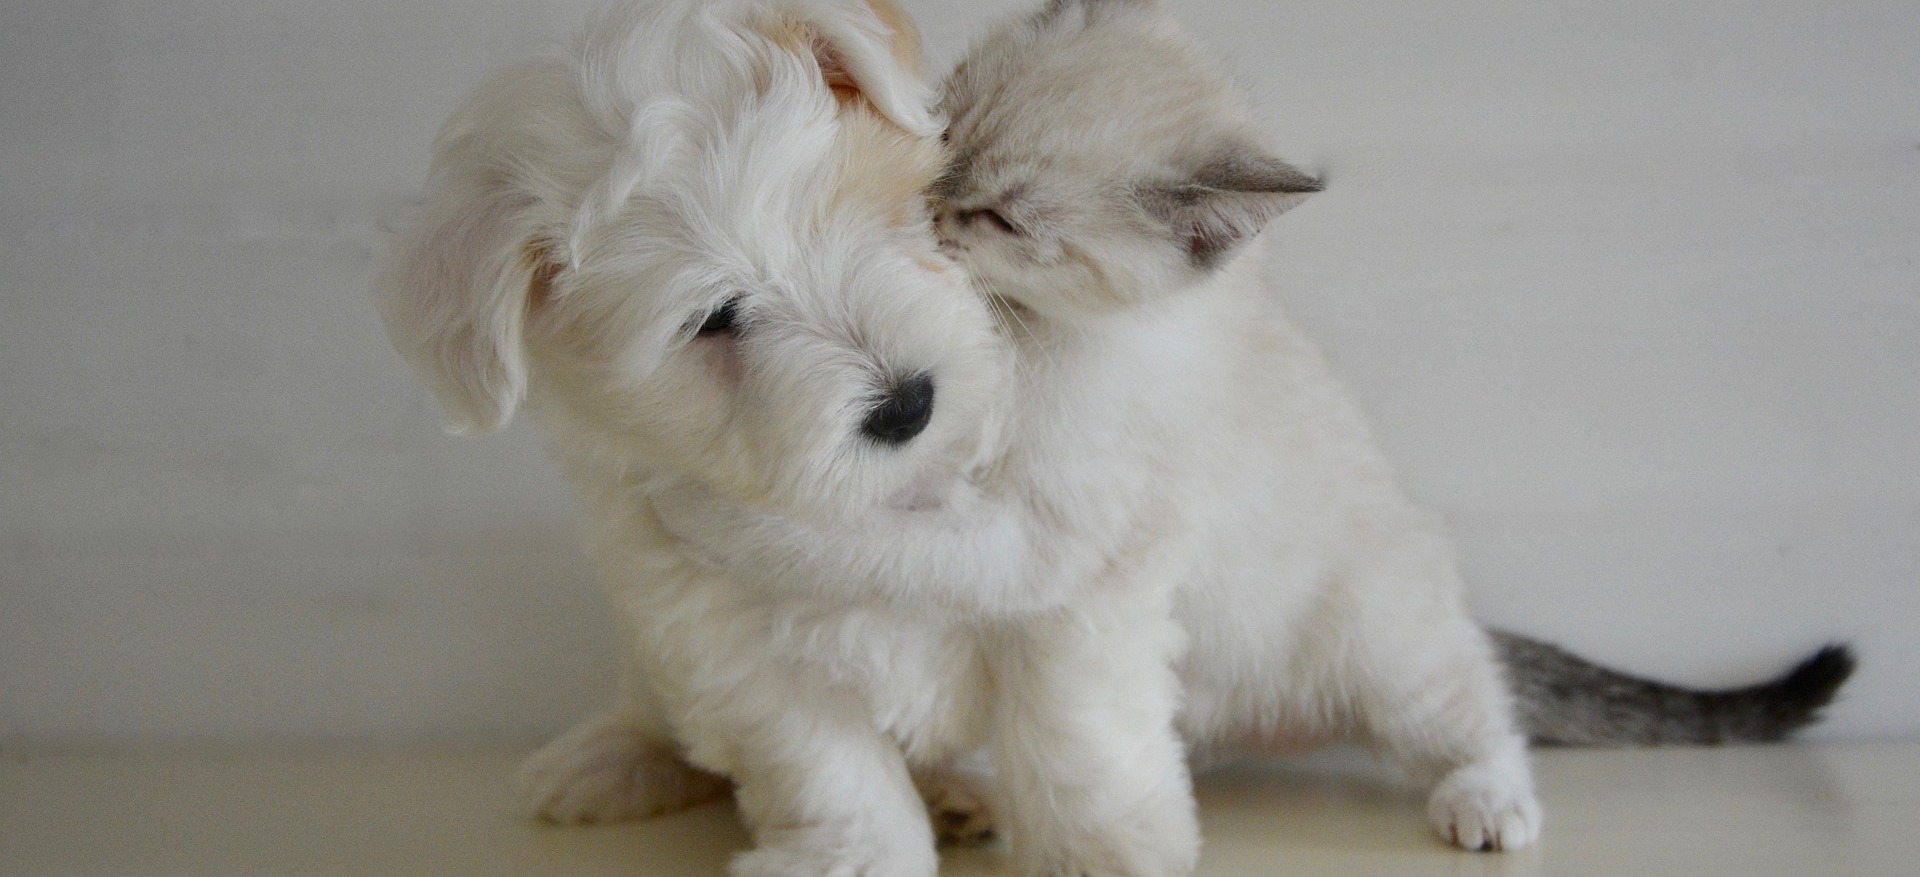 Puppy and kitty